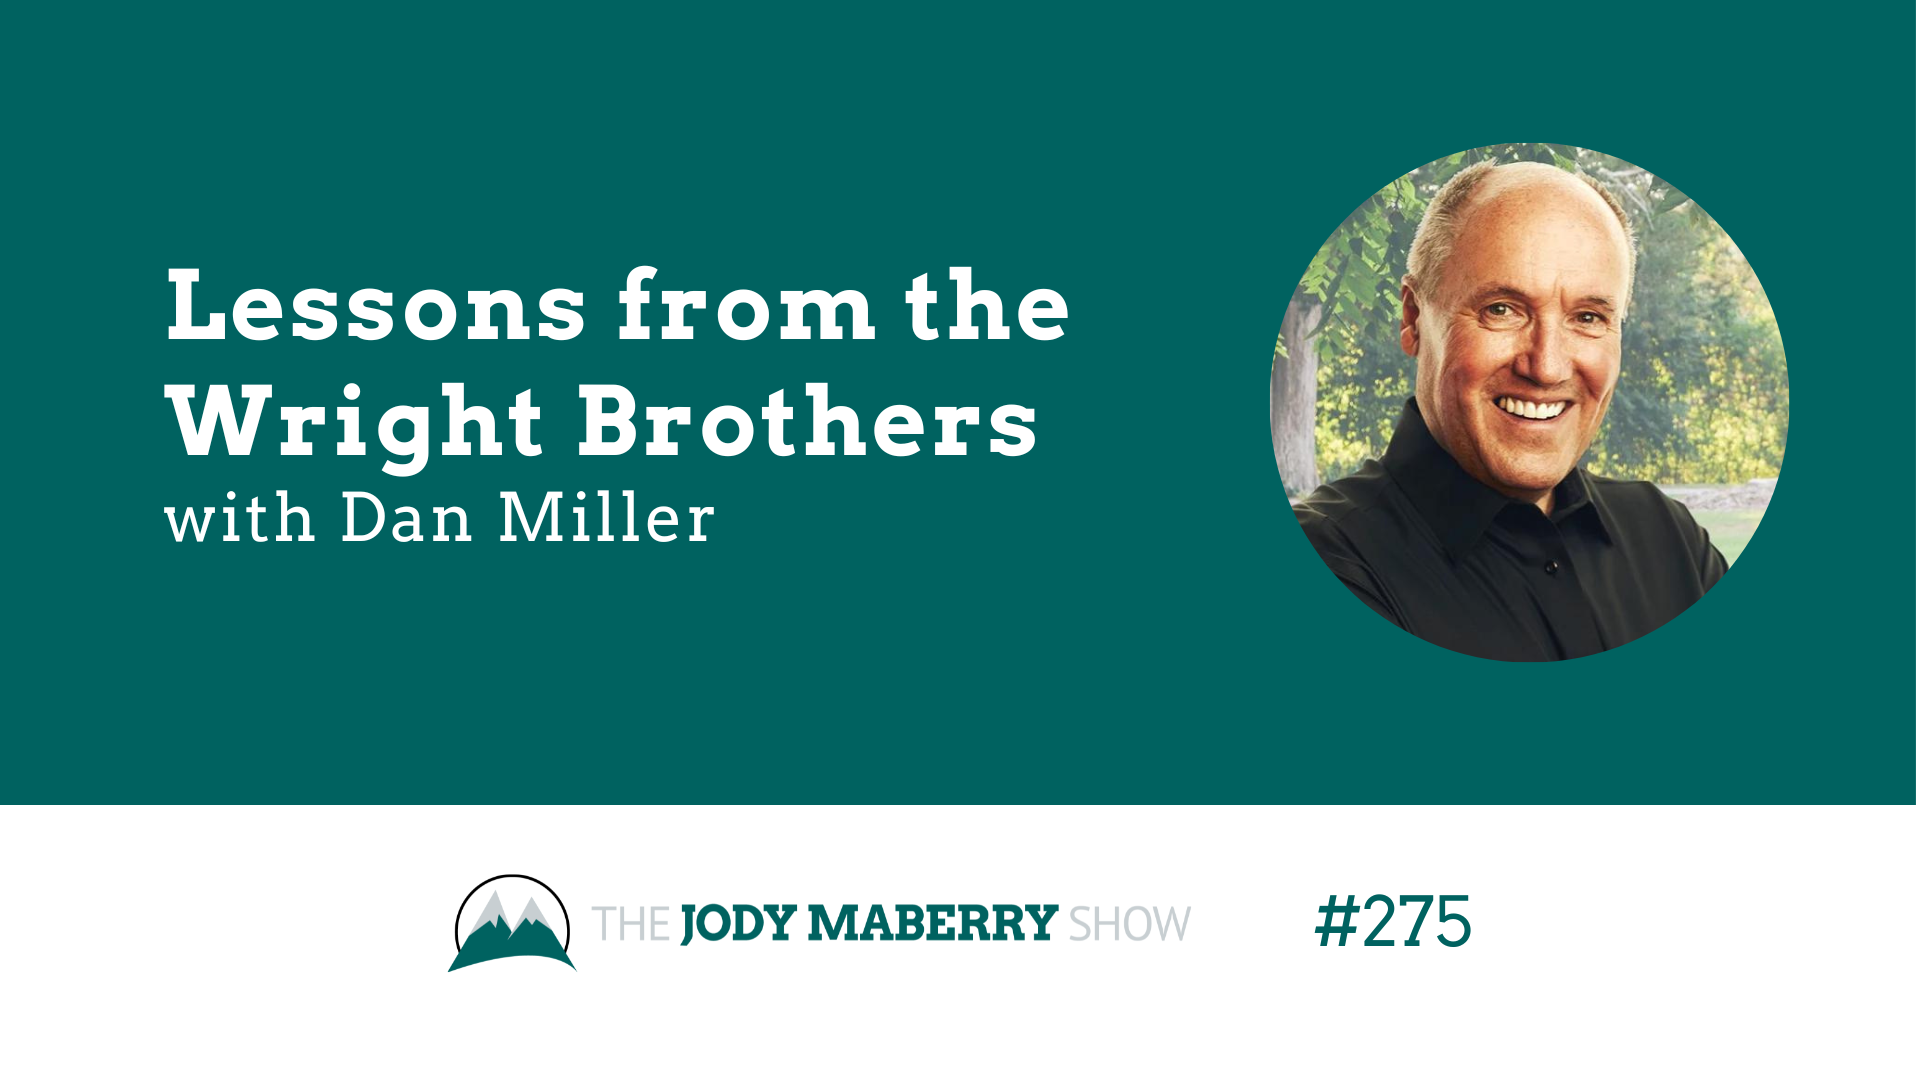 Jody Maberry Show Episode 275 Lessons from the Wright Brothers Dan Miller